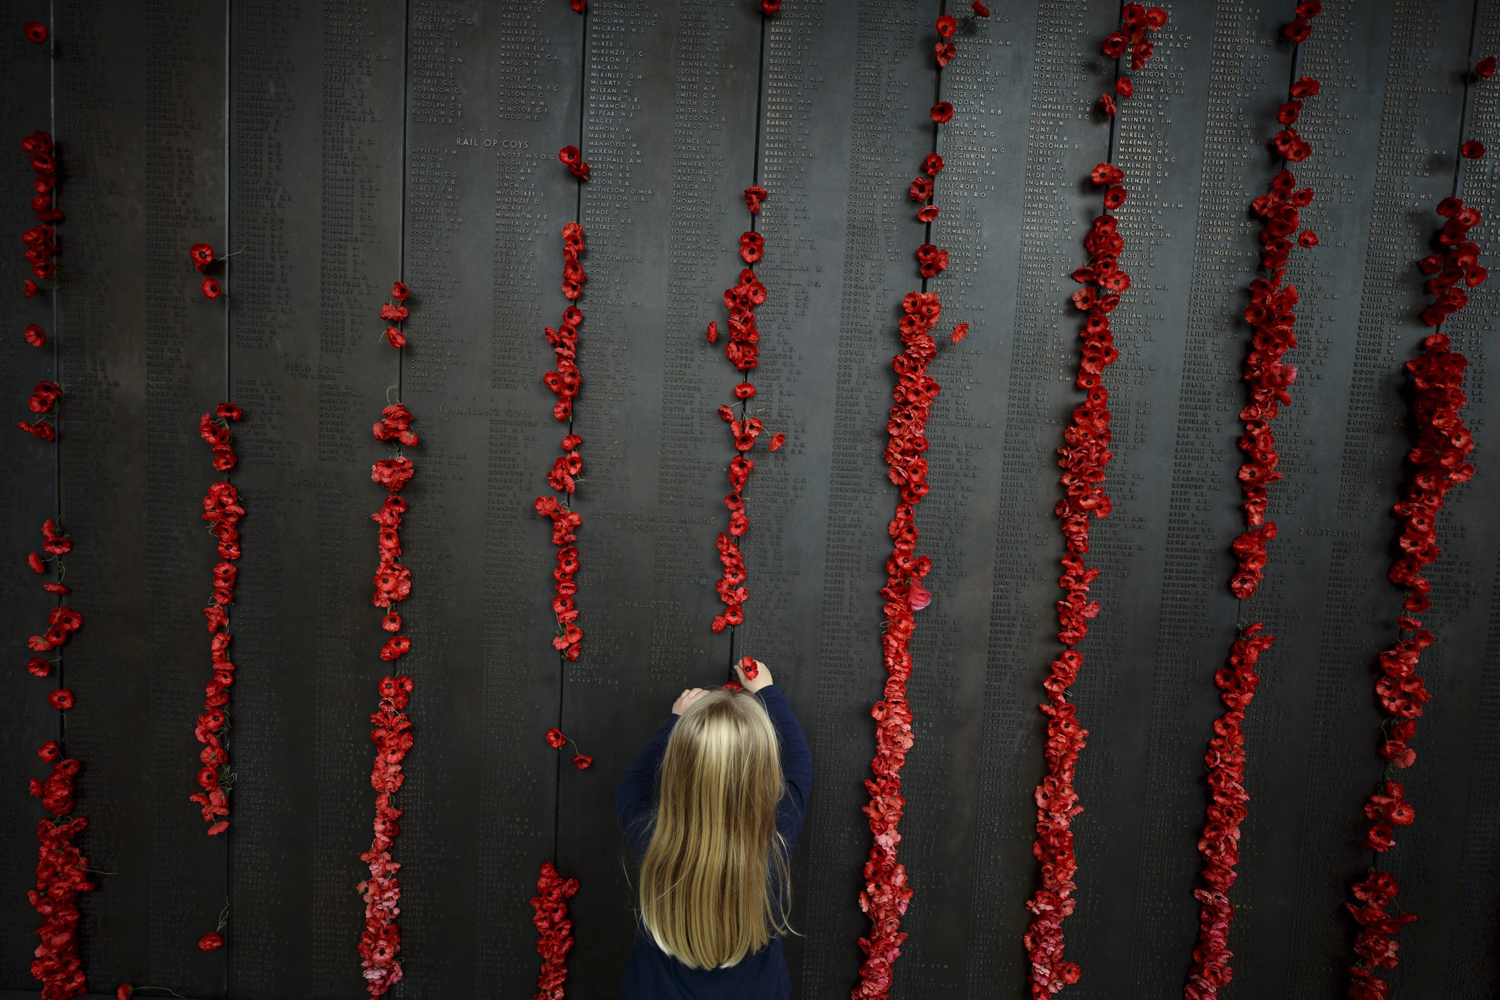 Apr. 25, 2014. A little girl places a poppy on the Roll of Honour at the Australian War Memorial in Canberra, Australia. This year marks the 99th anniversary of Australian forces landing at Gallipoli.